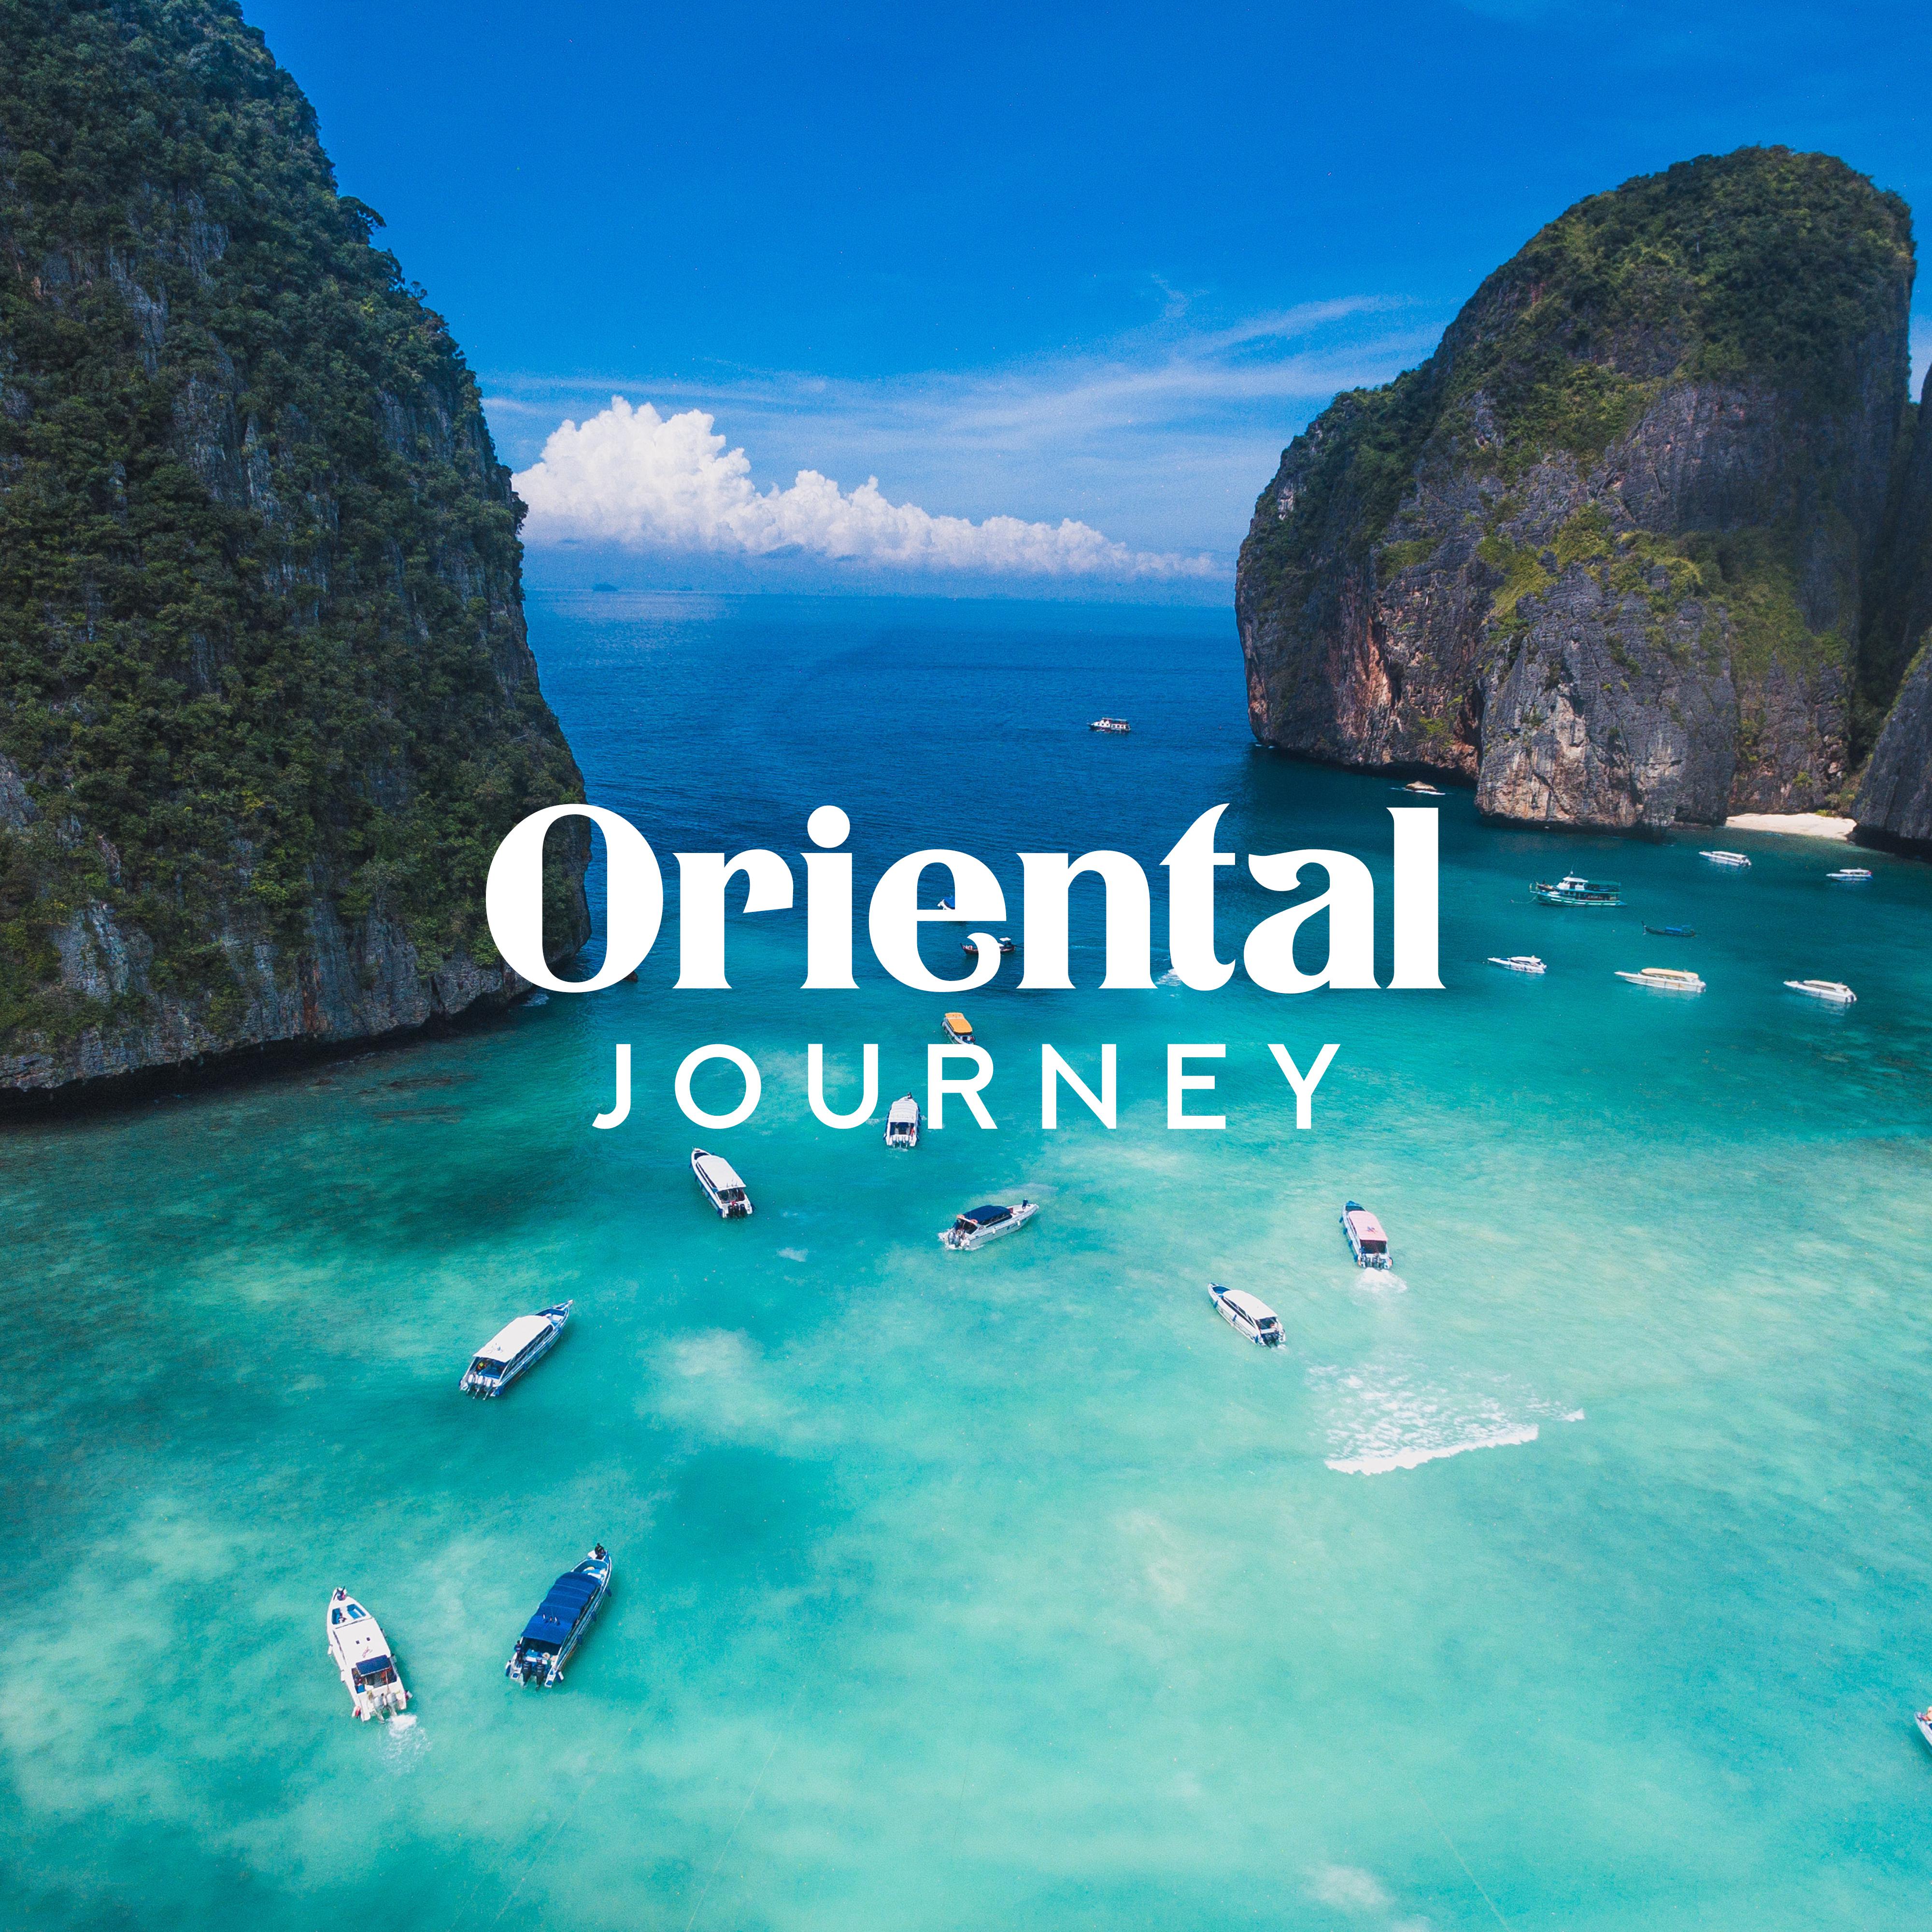 Oriental Journey: Chillout Sounds from Exotic Islands and Tropical Beaches Around the World, Inspired by the Asian Culture of the Far East